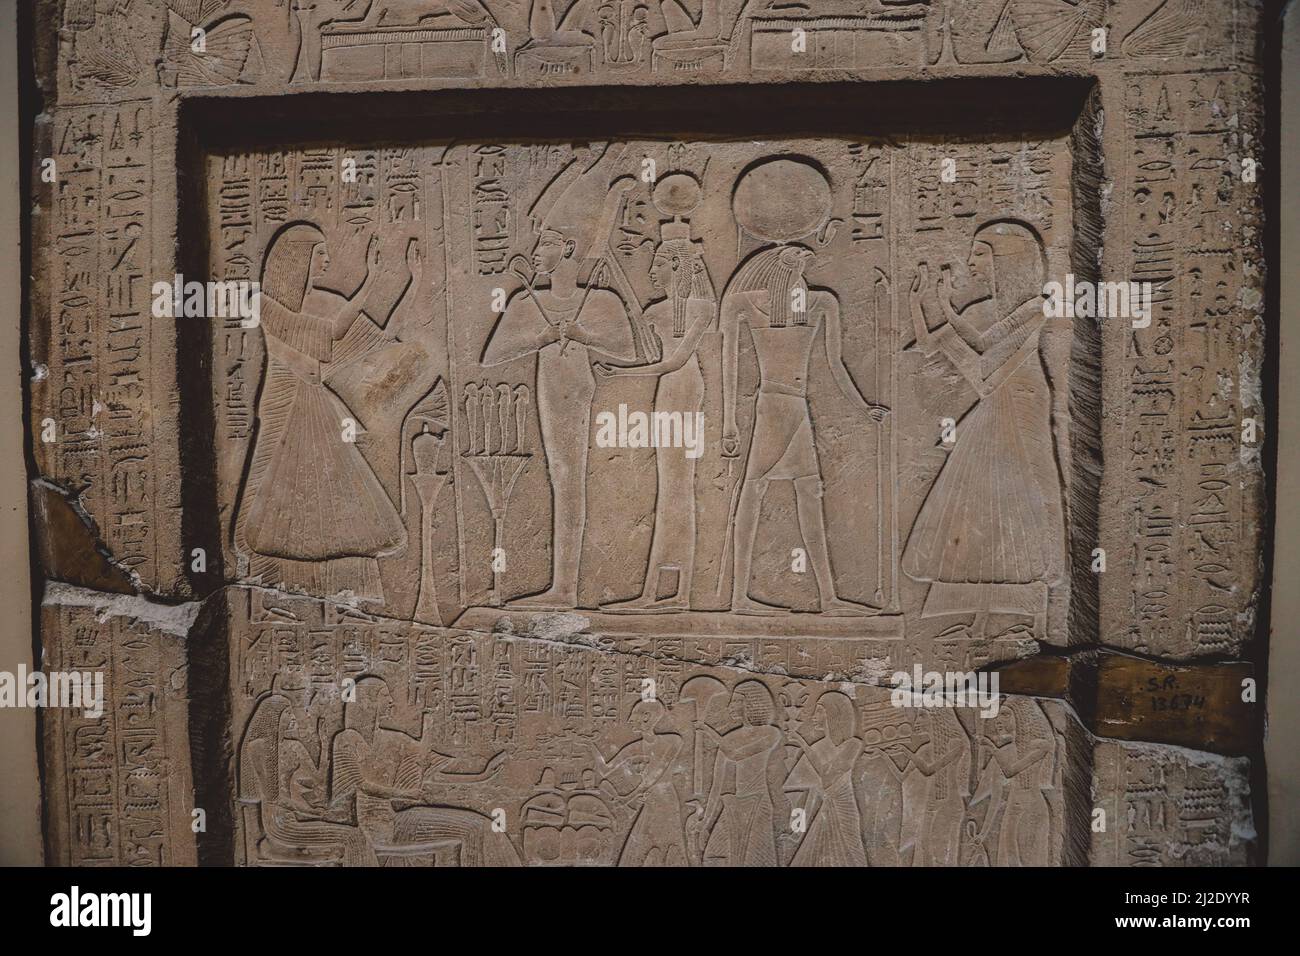 Interesting Ancient Paintings and Engravings with Hieroglyphics symbols in the Cairo Egyptian Museum, the oldest archaeological museum in the Middle E Stock Photo